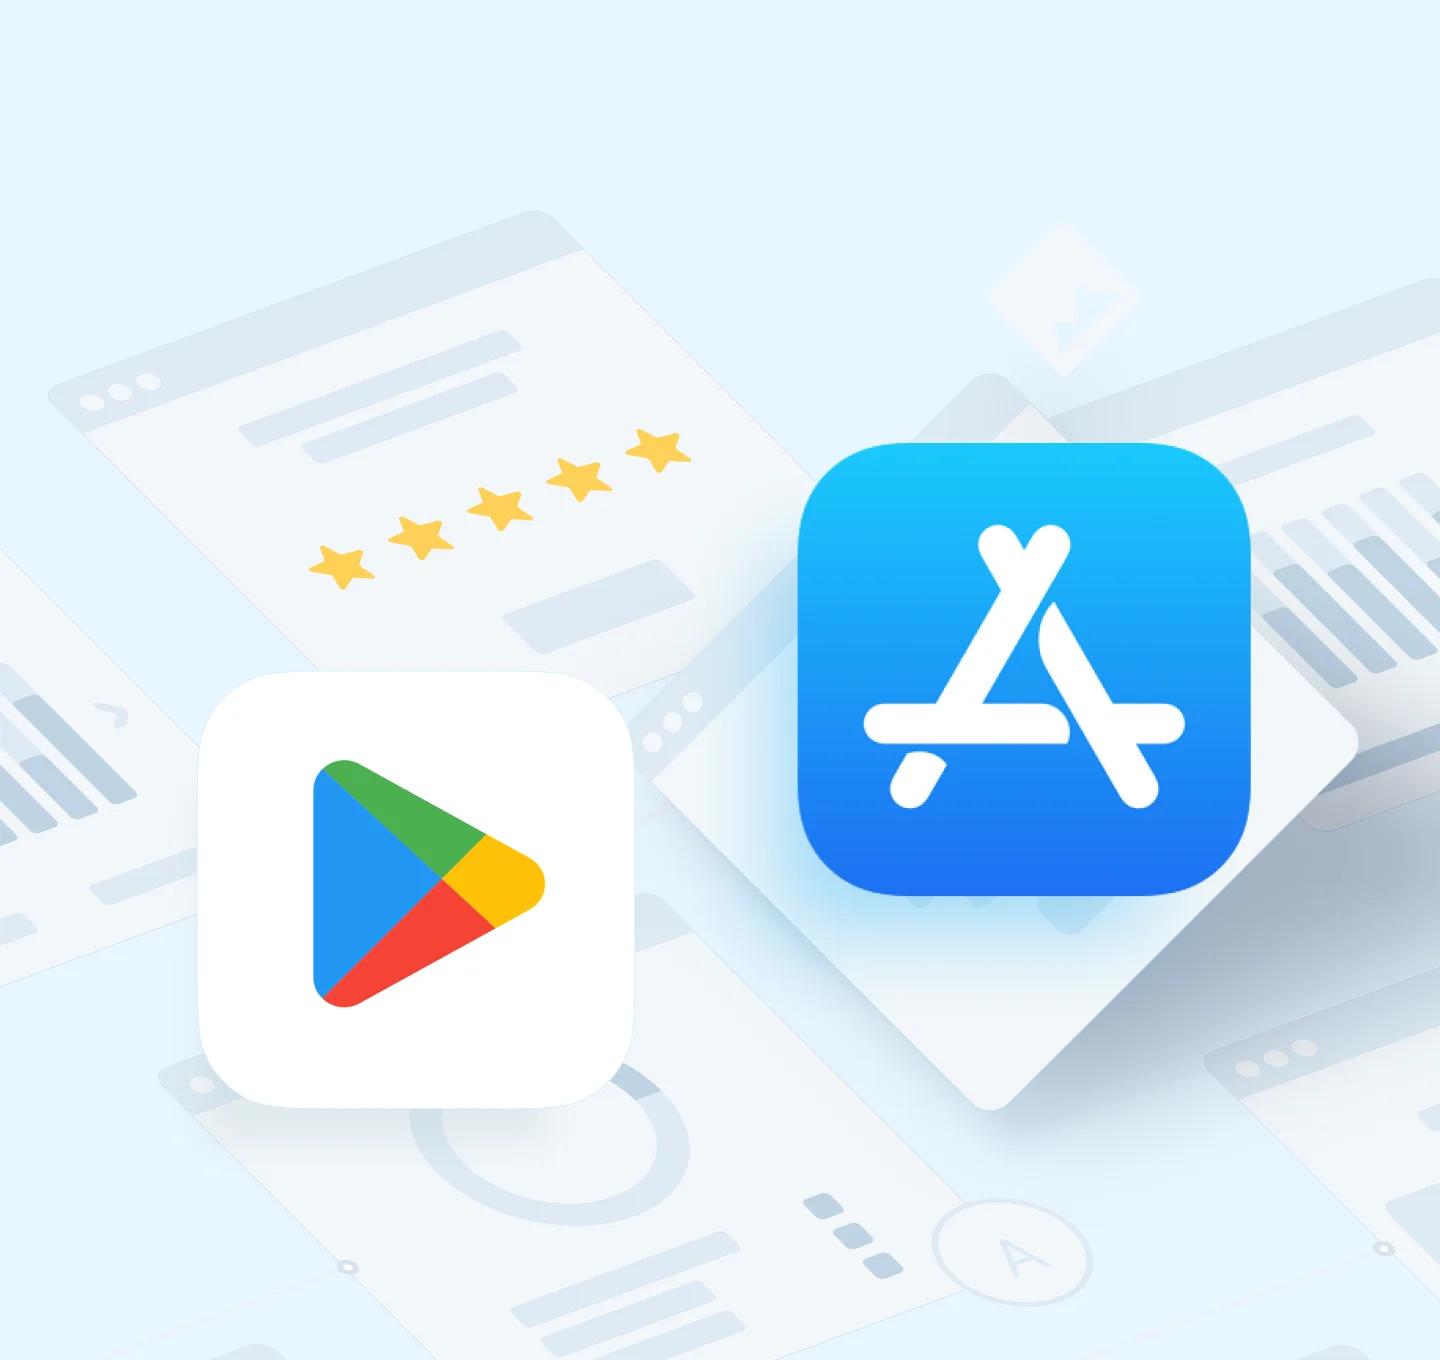 Google play and App store icons on blue background